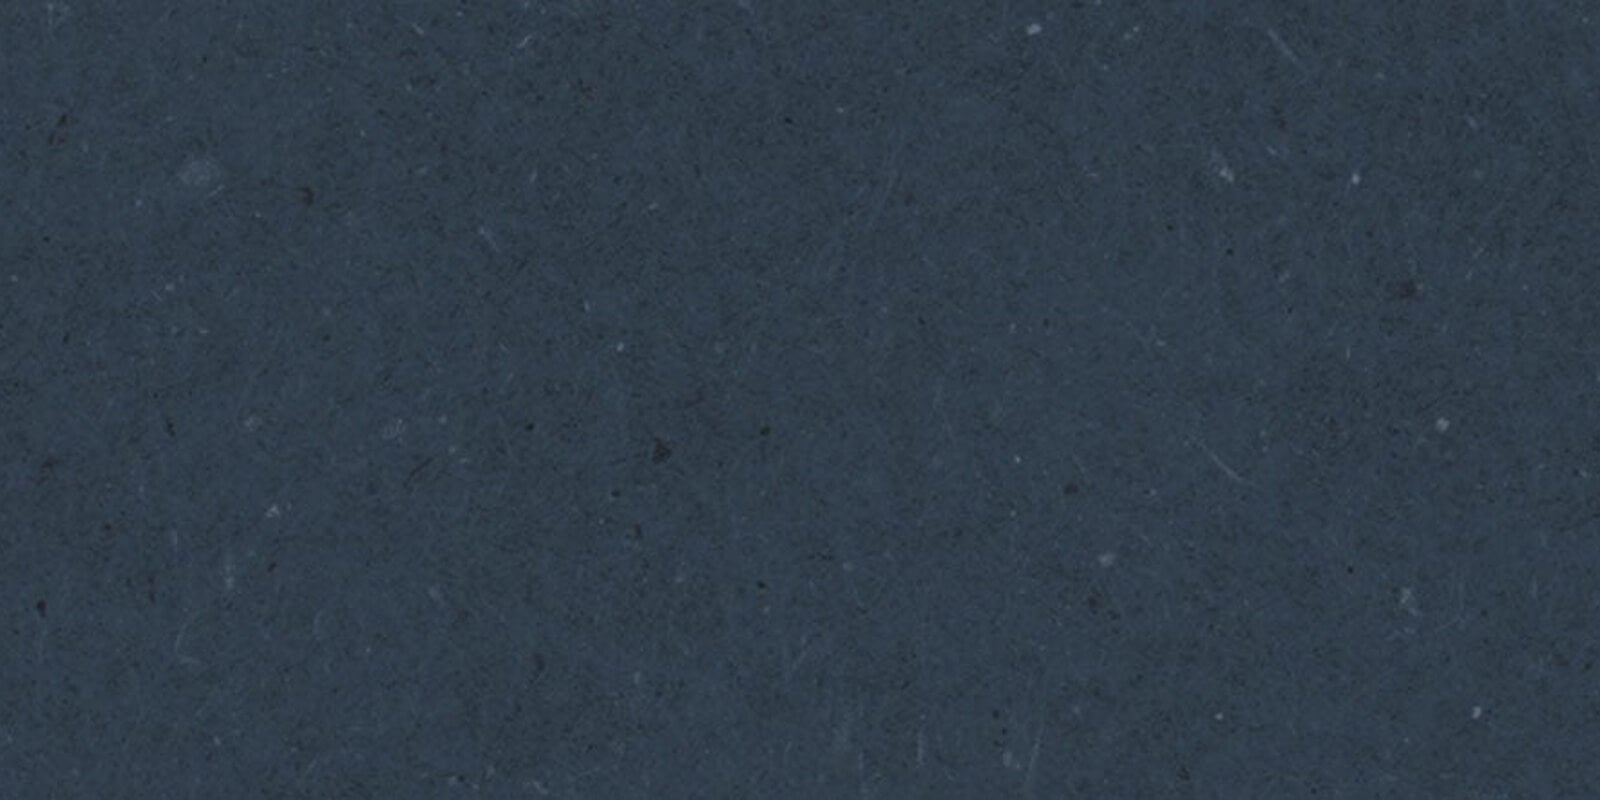 Dark grey recycled paper background image